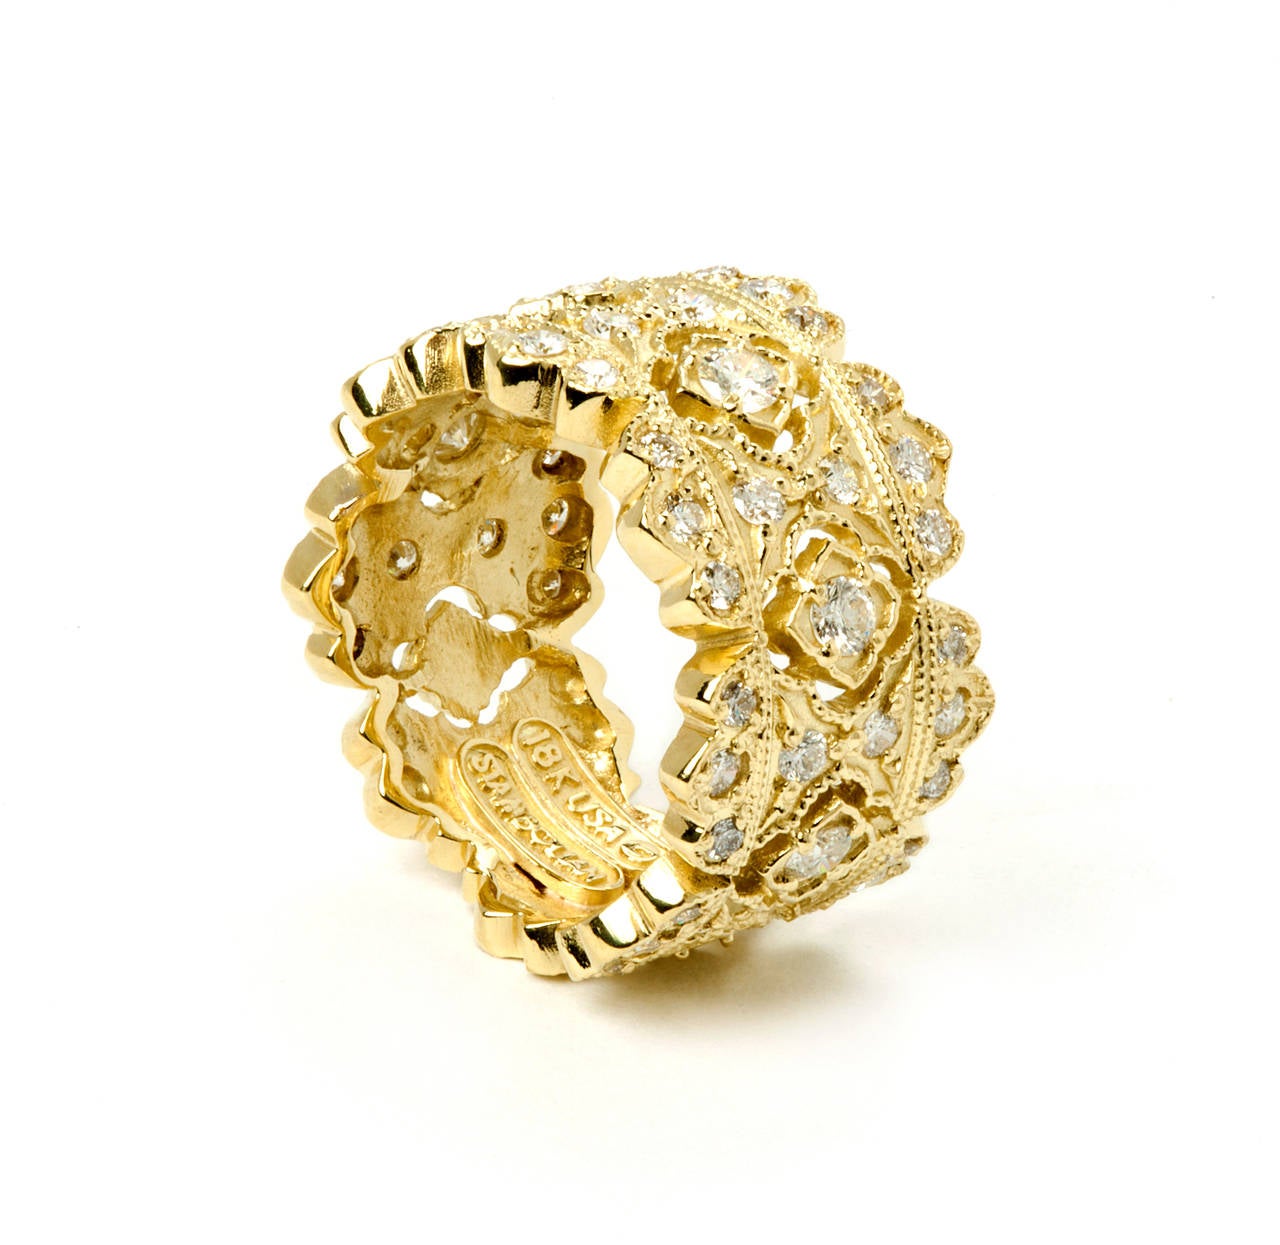 18k Gold and Diamond Band Ring by Stambolian

This is the band ring from the 